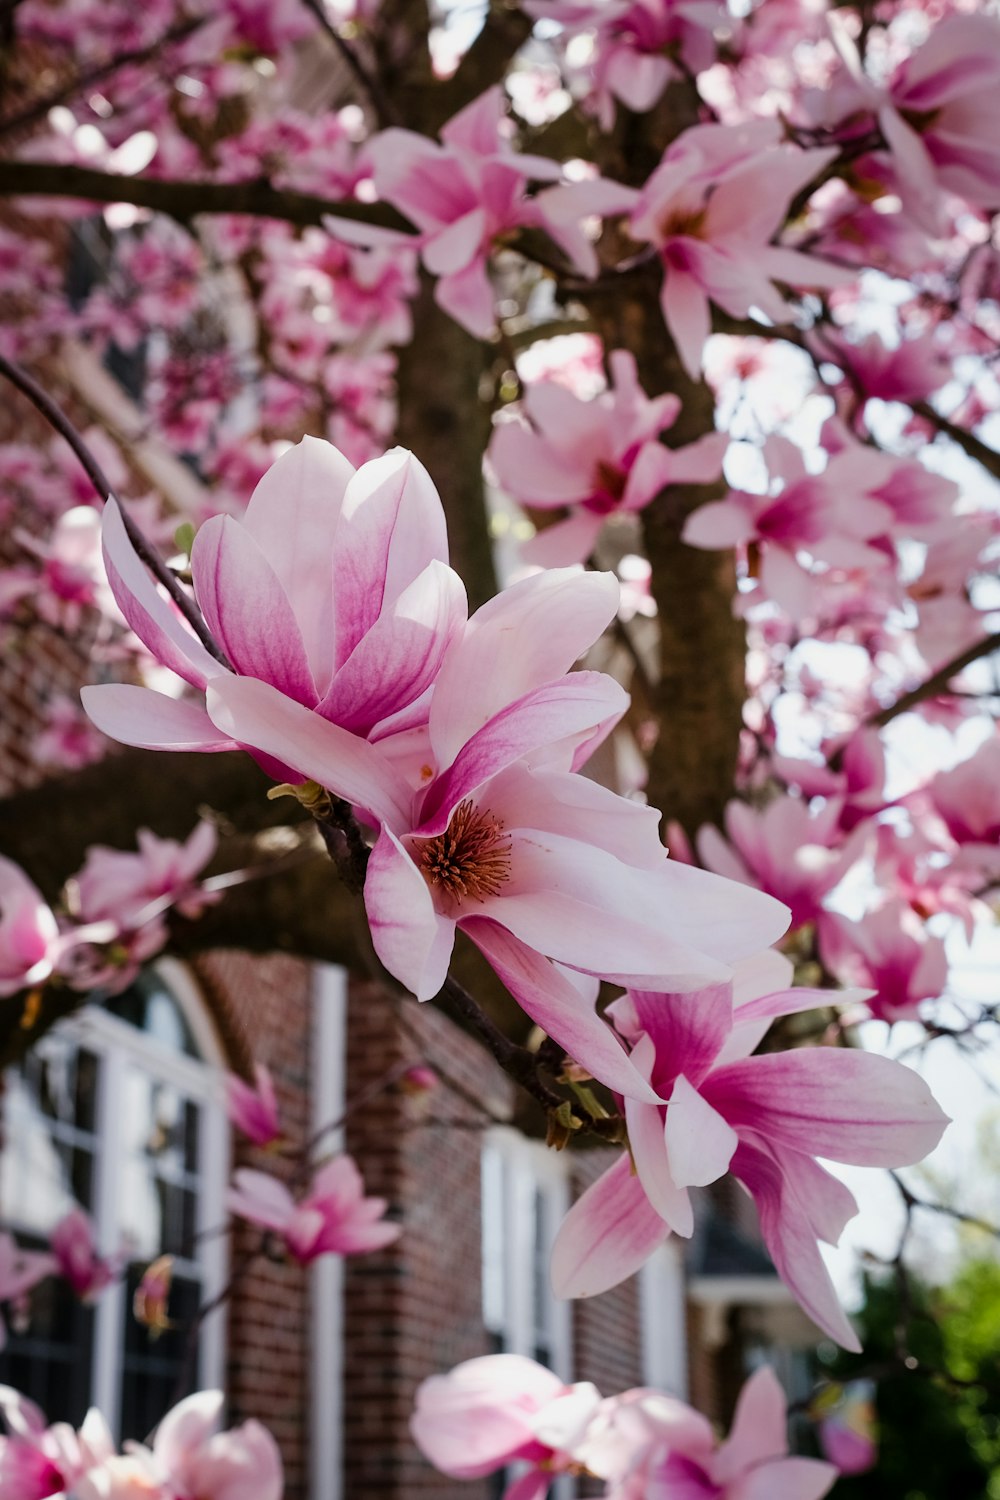 pink flowers blooming on a tree in front of a brick building